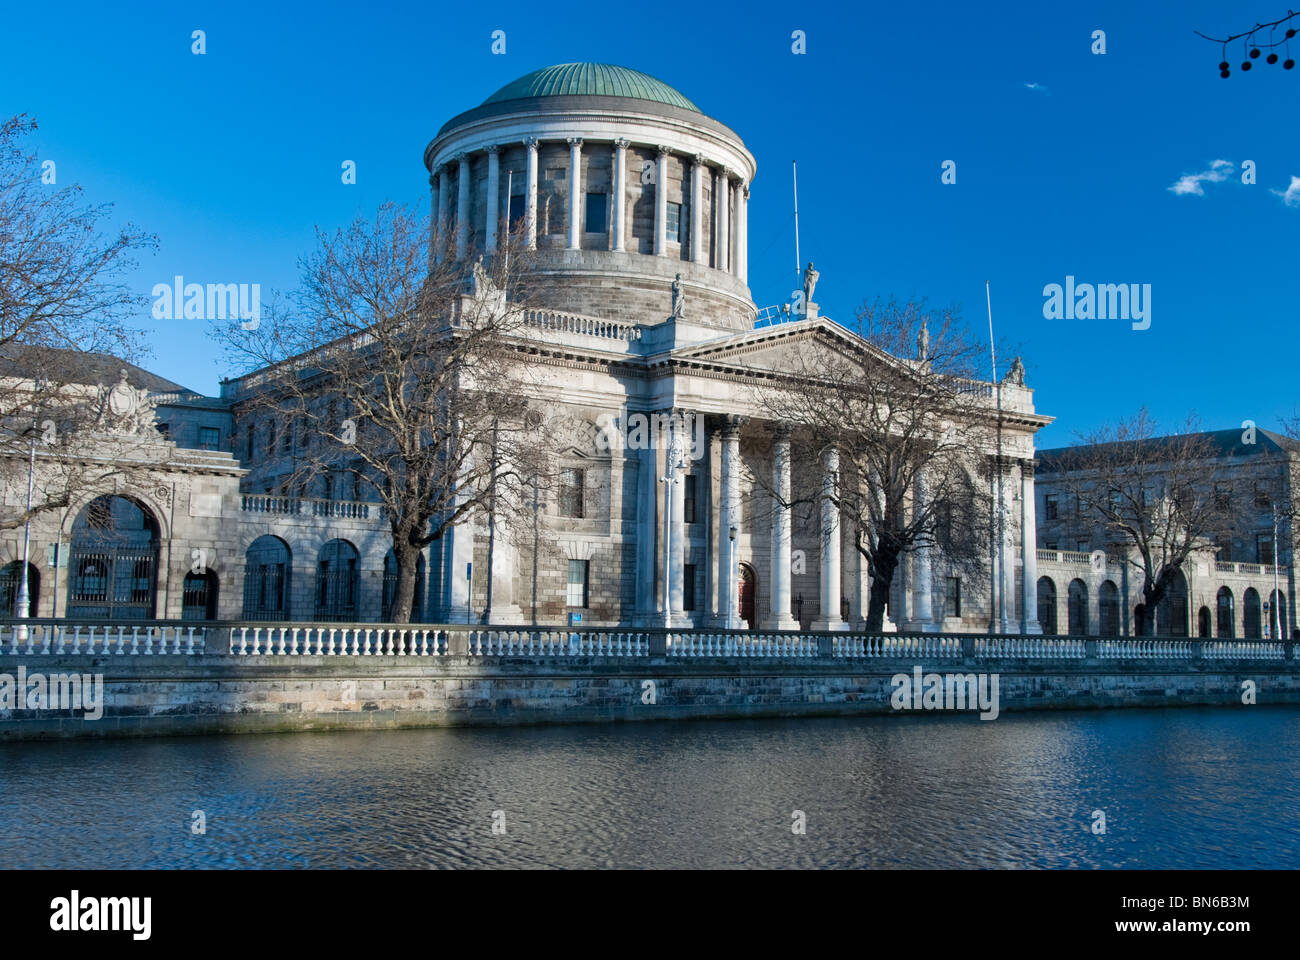 The Four Courts, the location of the Supreme and High Court of Ireland. Stock Photo